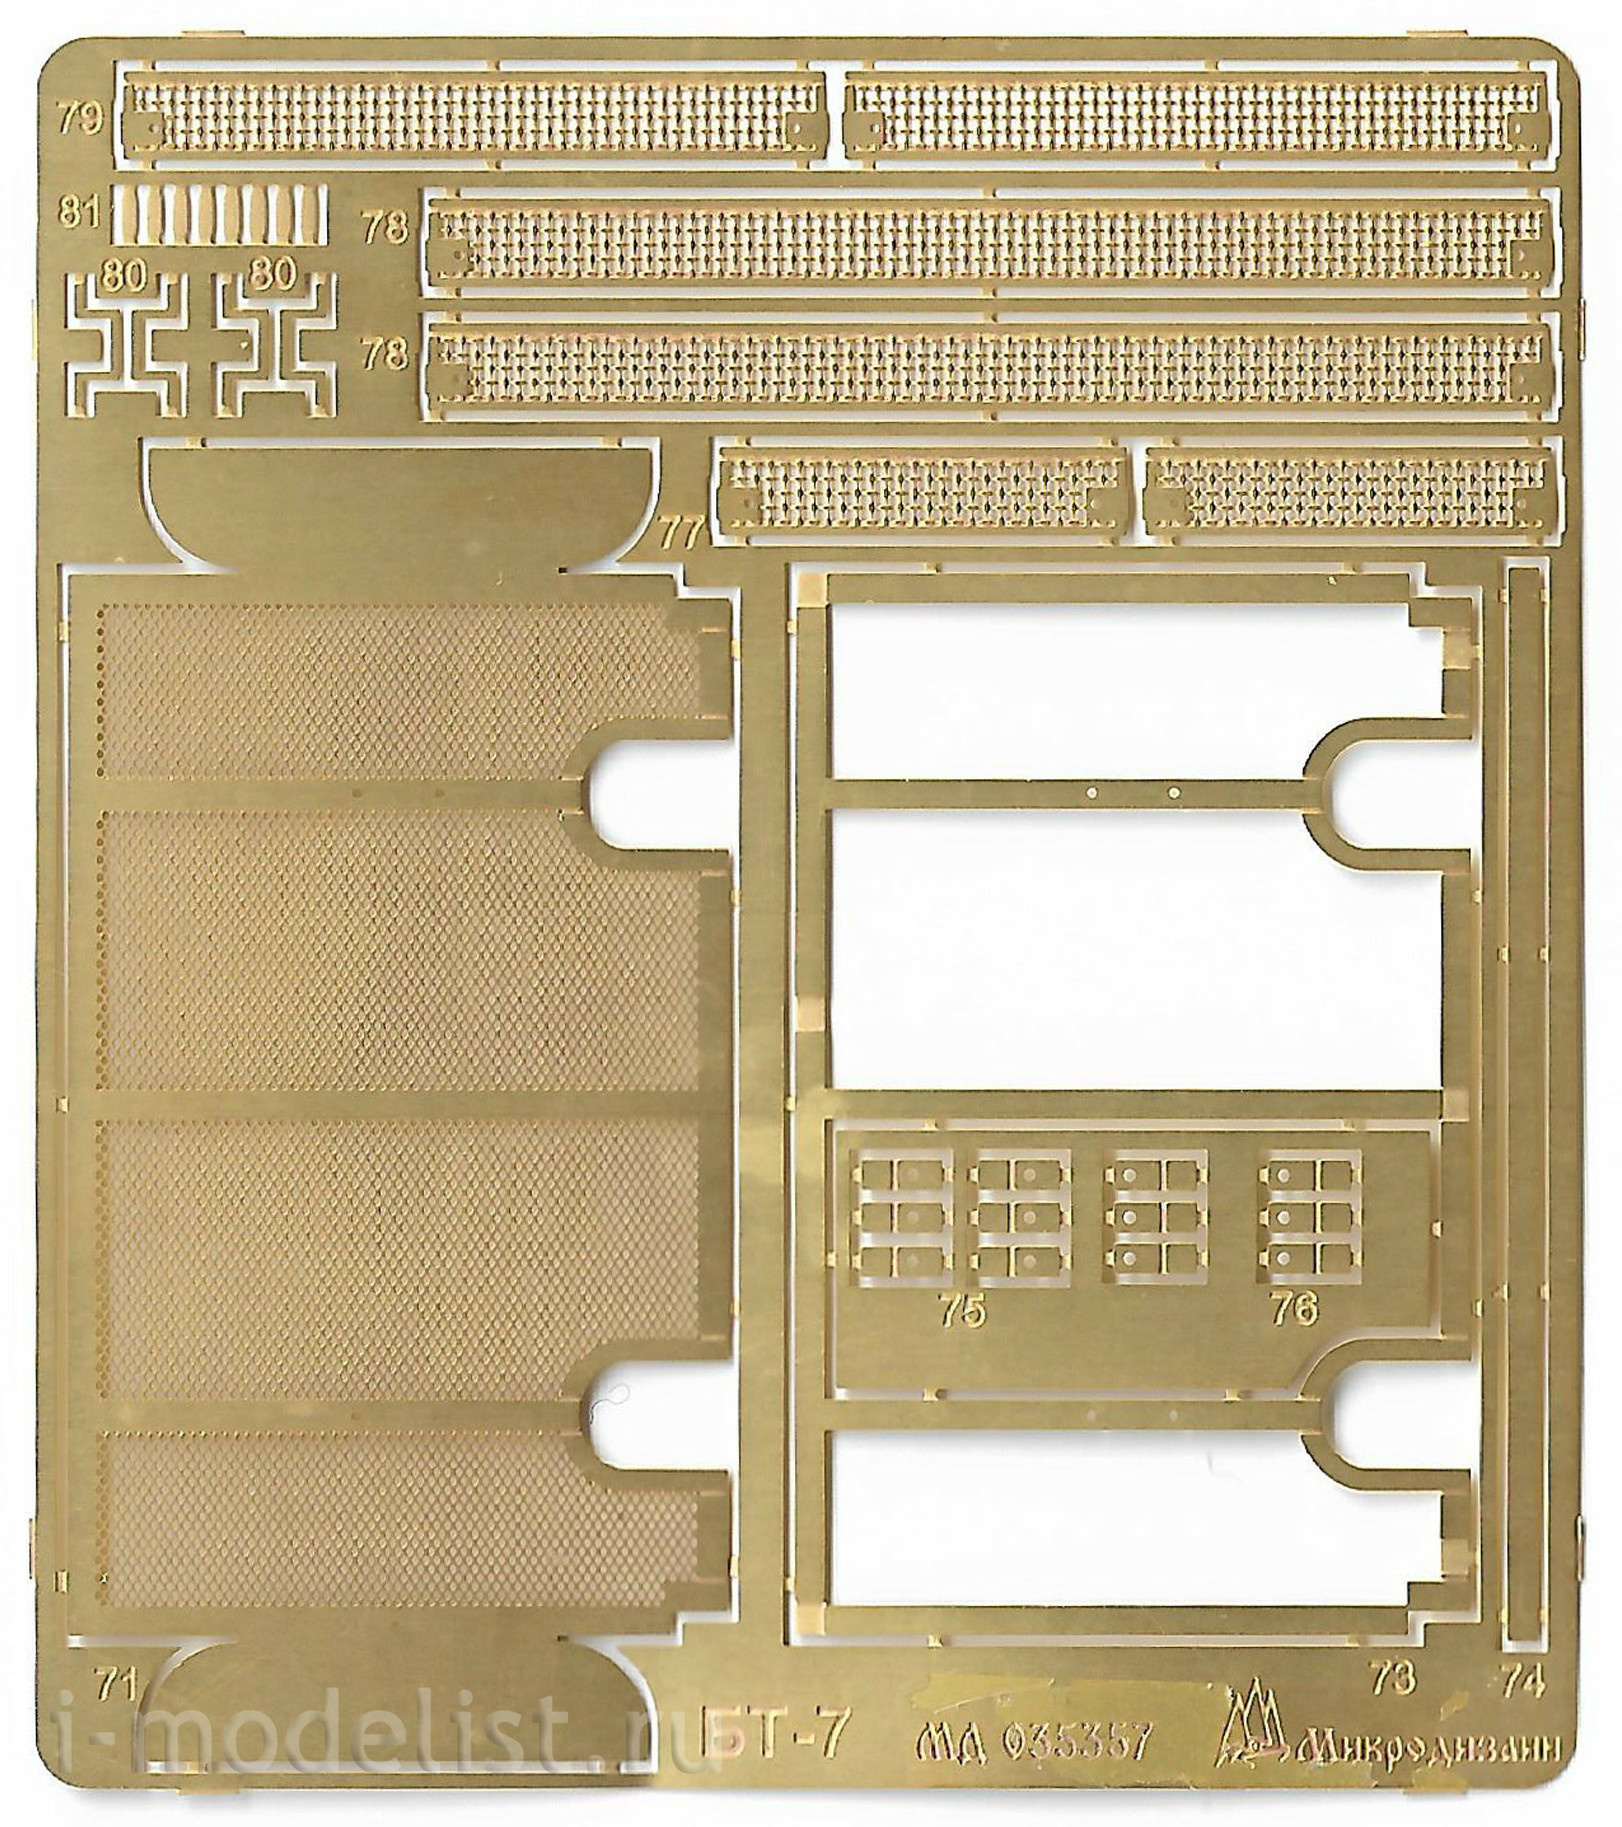 035357 Microdesign 1/35 set of photo etching on the BT-7 from the Zvezda.